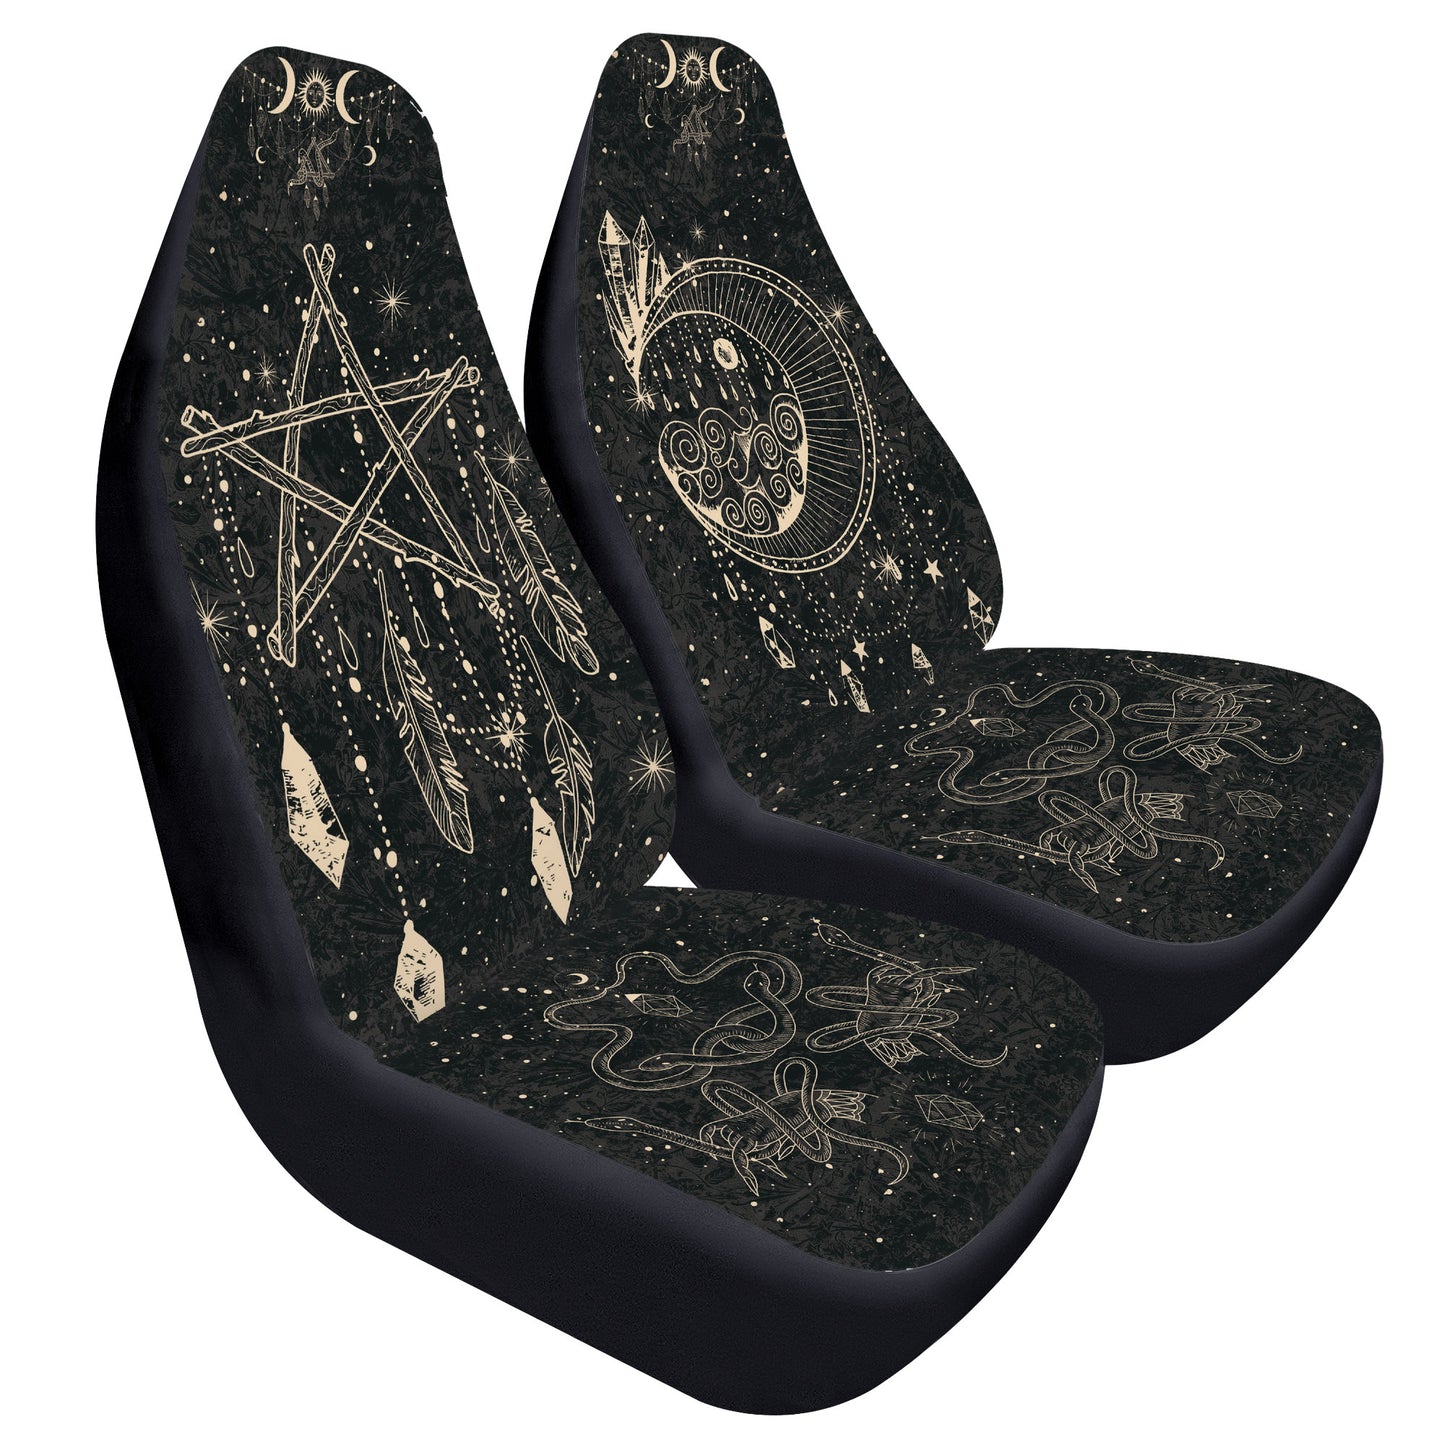 Esoteric Car Seat Covers